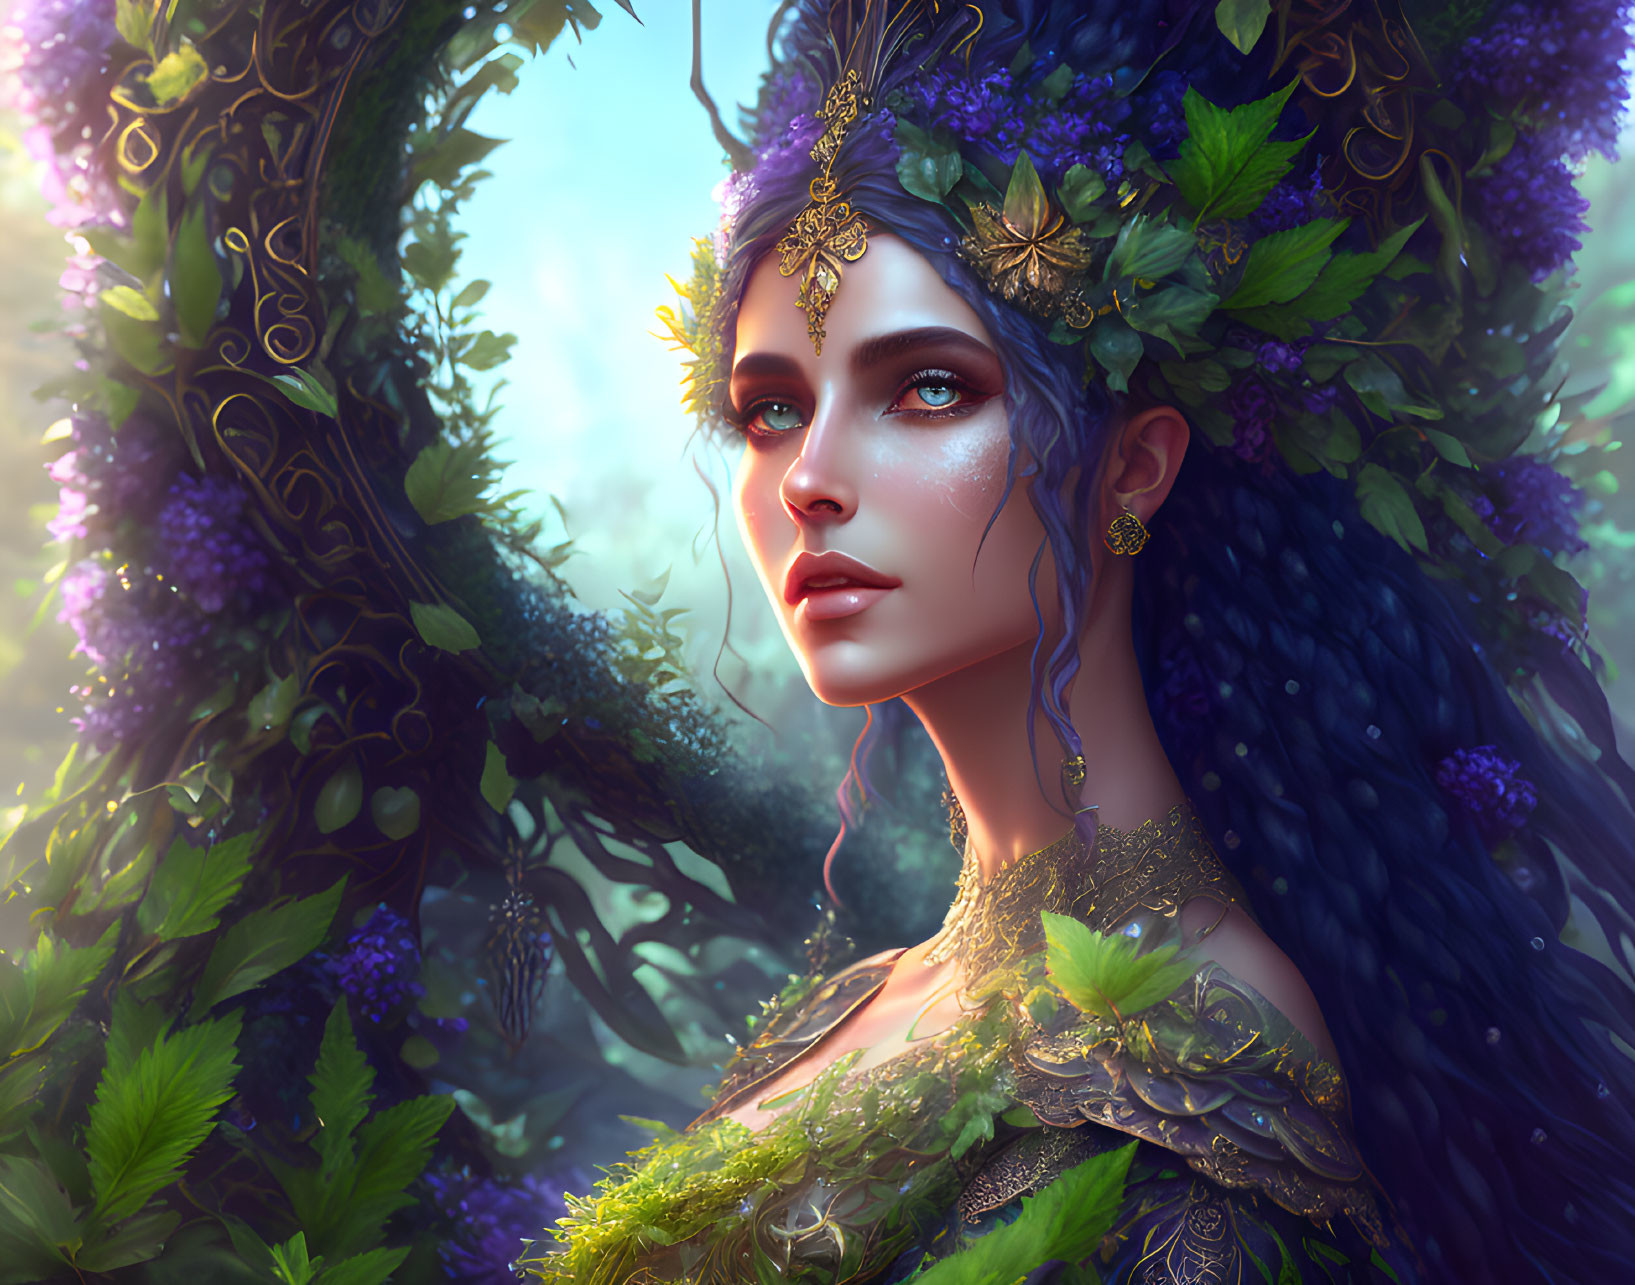 Fantastical portrait of woman with blue hair and floral crown in lush forest.